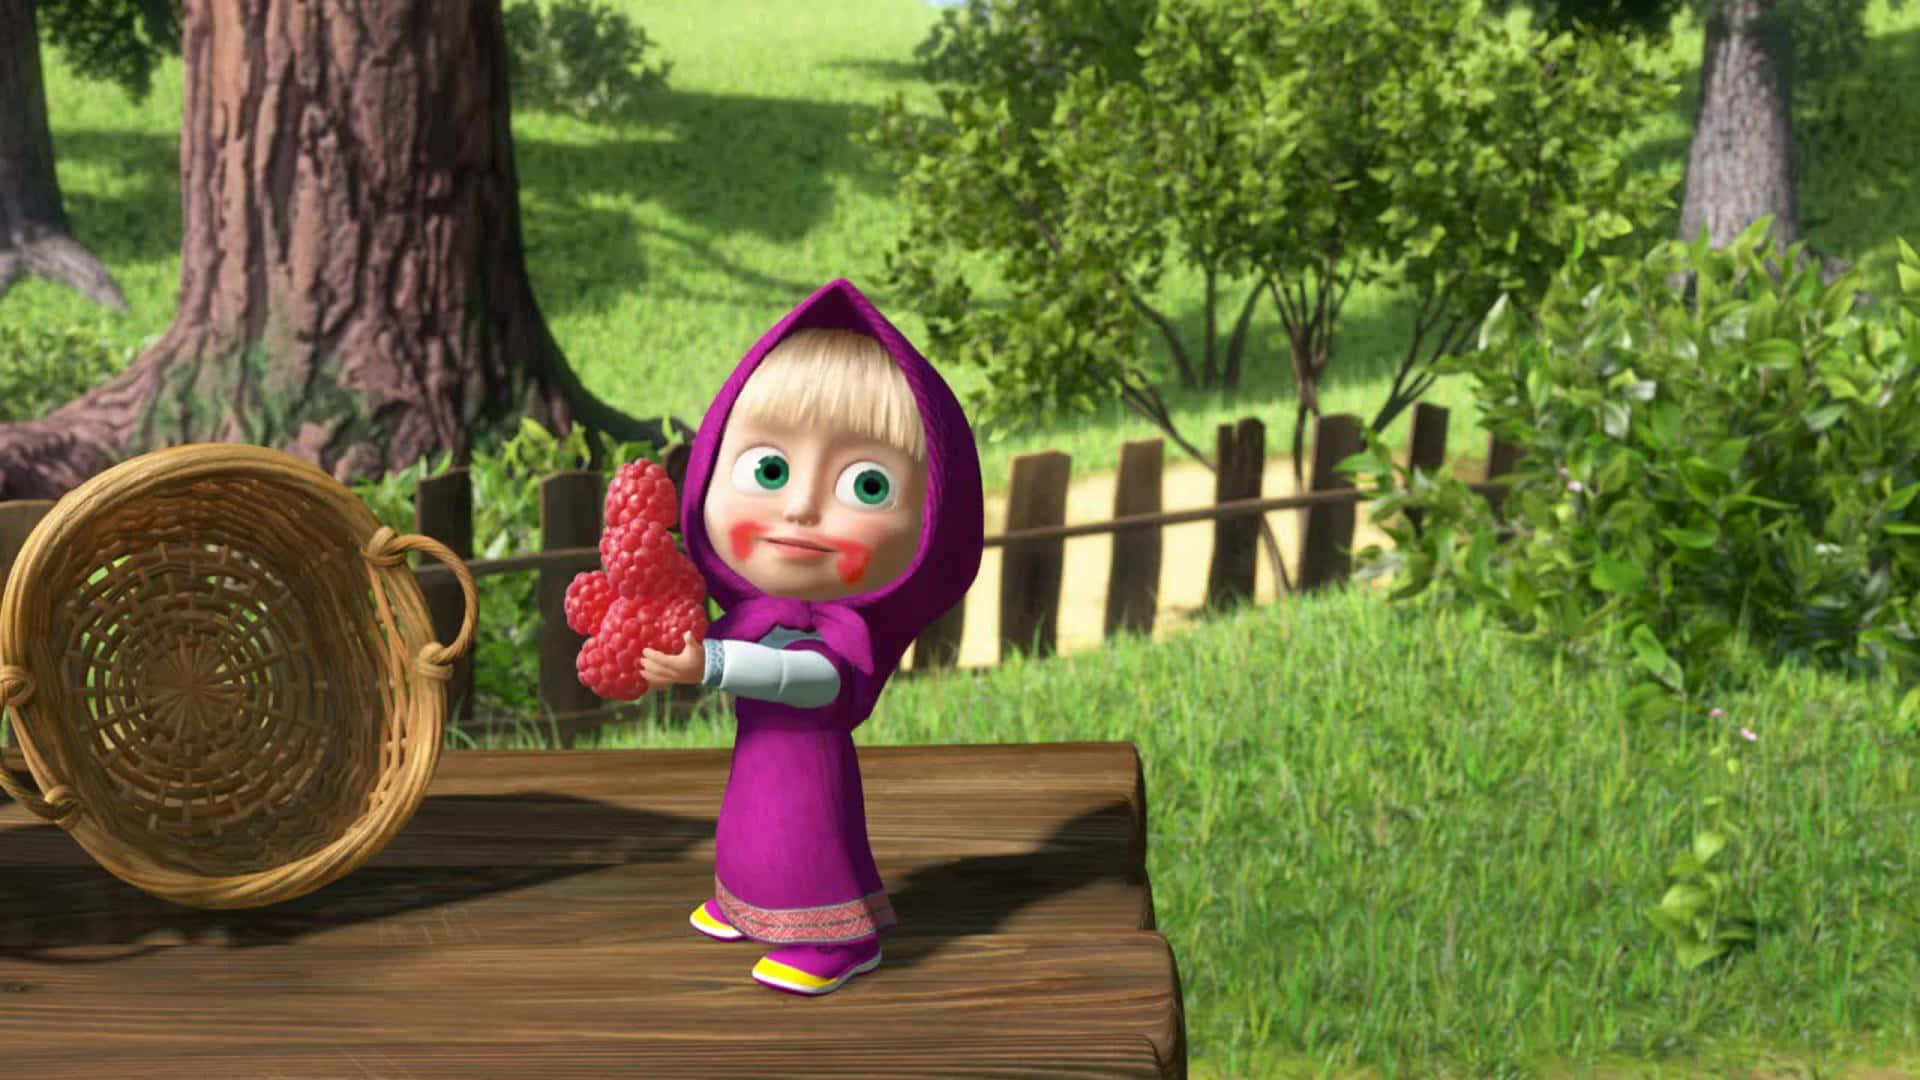 Masha and Bear enjoying a pleasant day in the forest